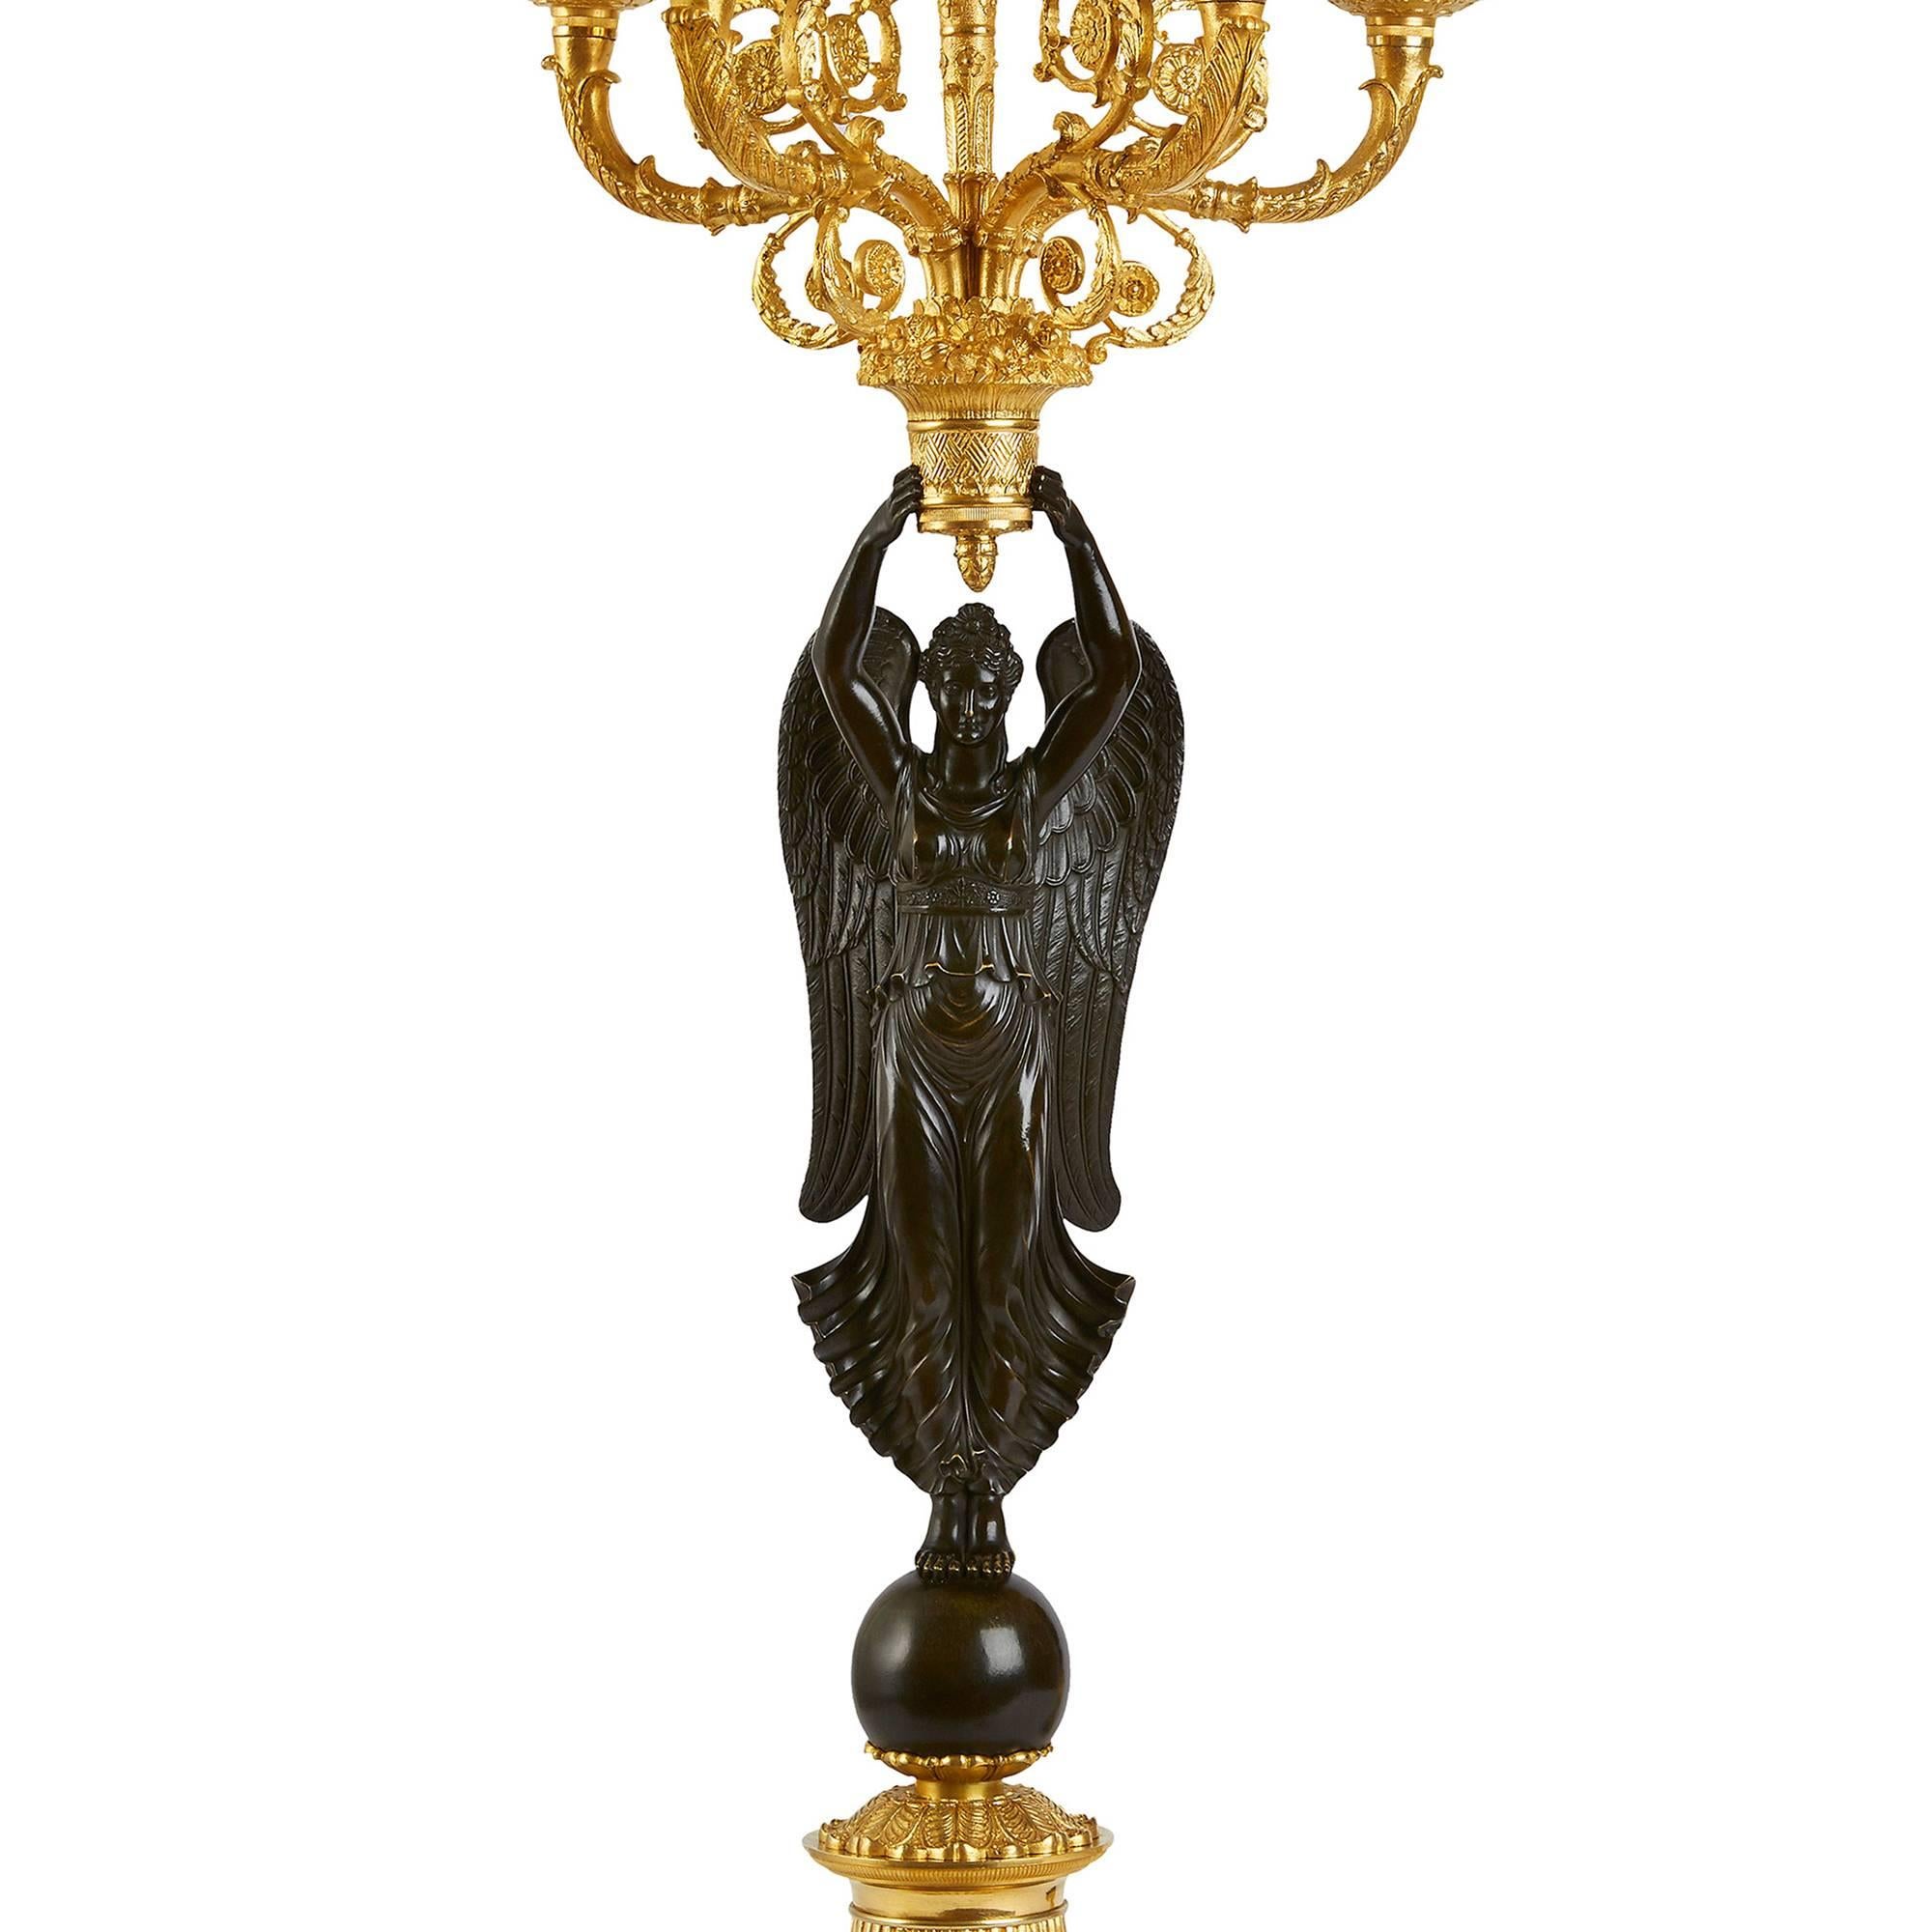 Each with winged figures of Victory holding aloft multi candelabra with scrolled branches each terminating in drip pans and nozzles, whilst standing on spheres.

These impressive candelabra with winged figures of Victory derive from a design for